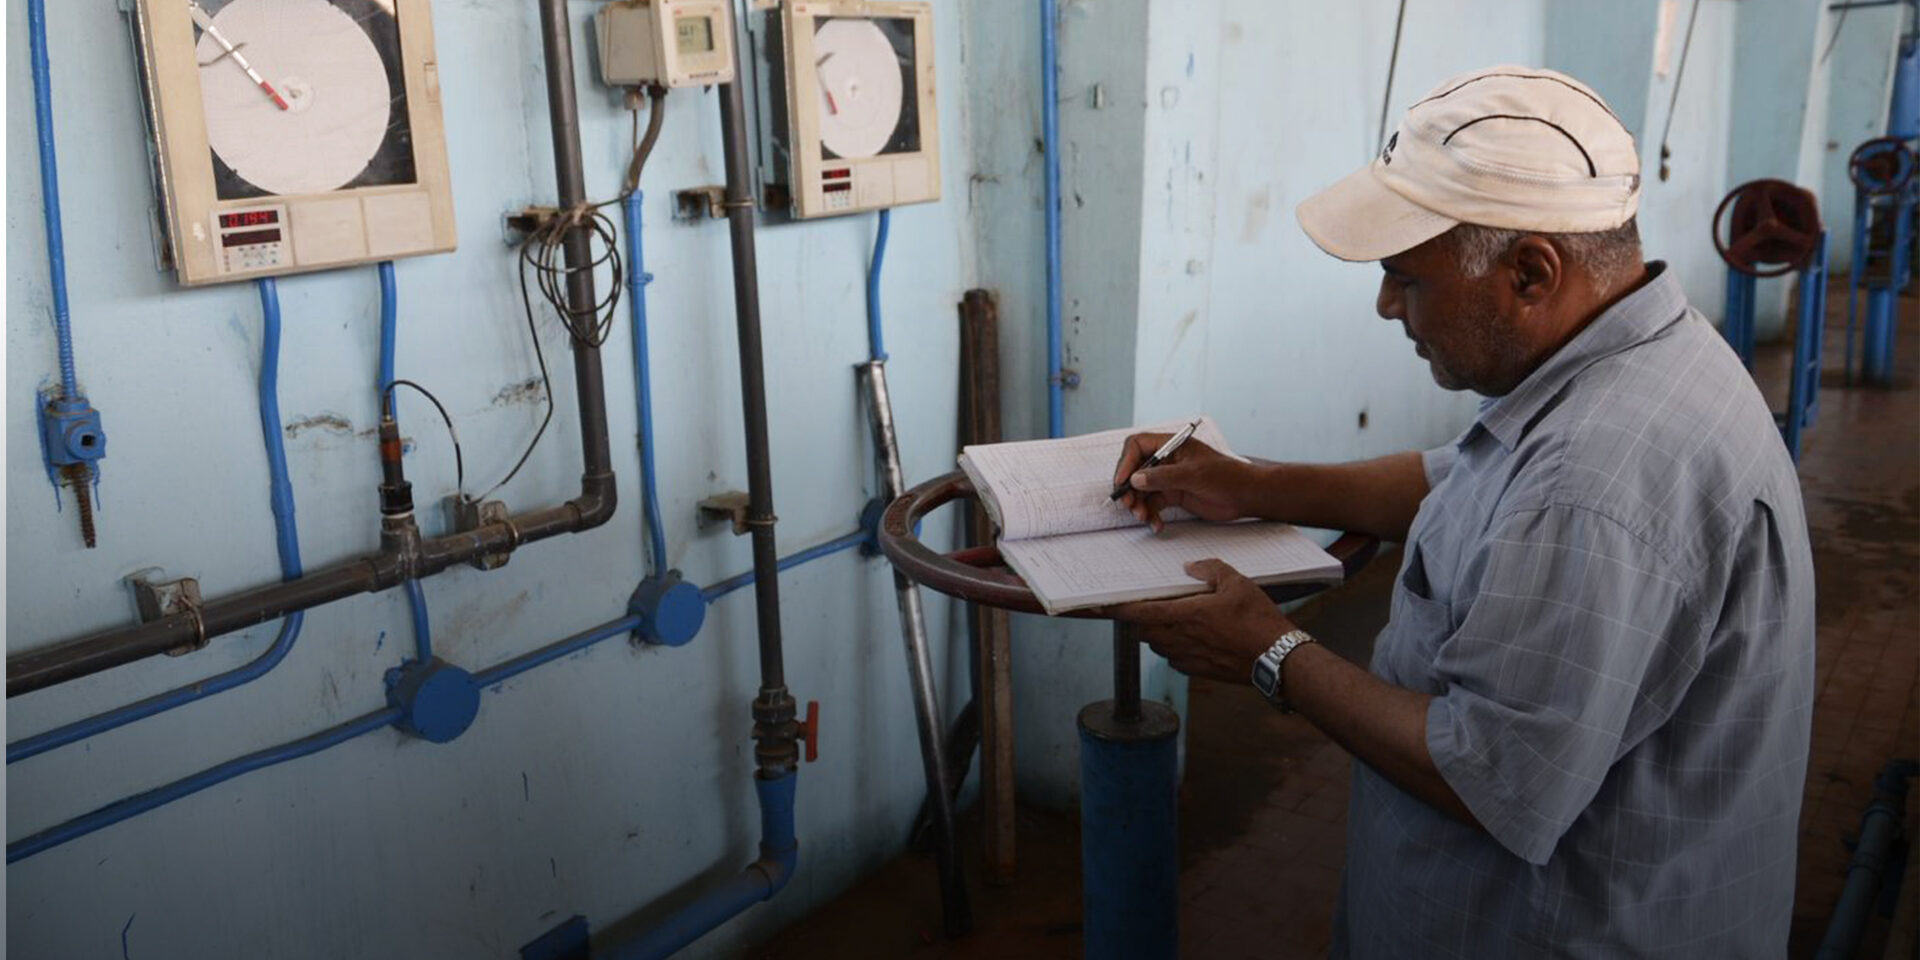 A man writing into a ledger placed on a large valve in a pump station.